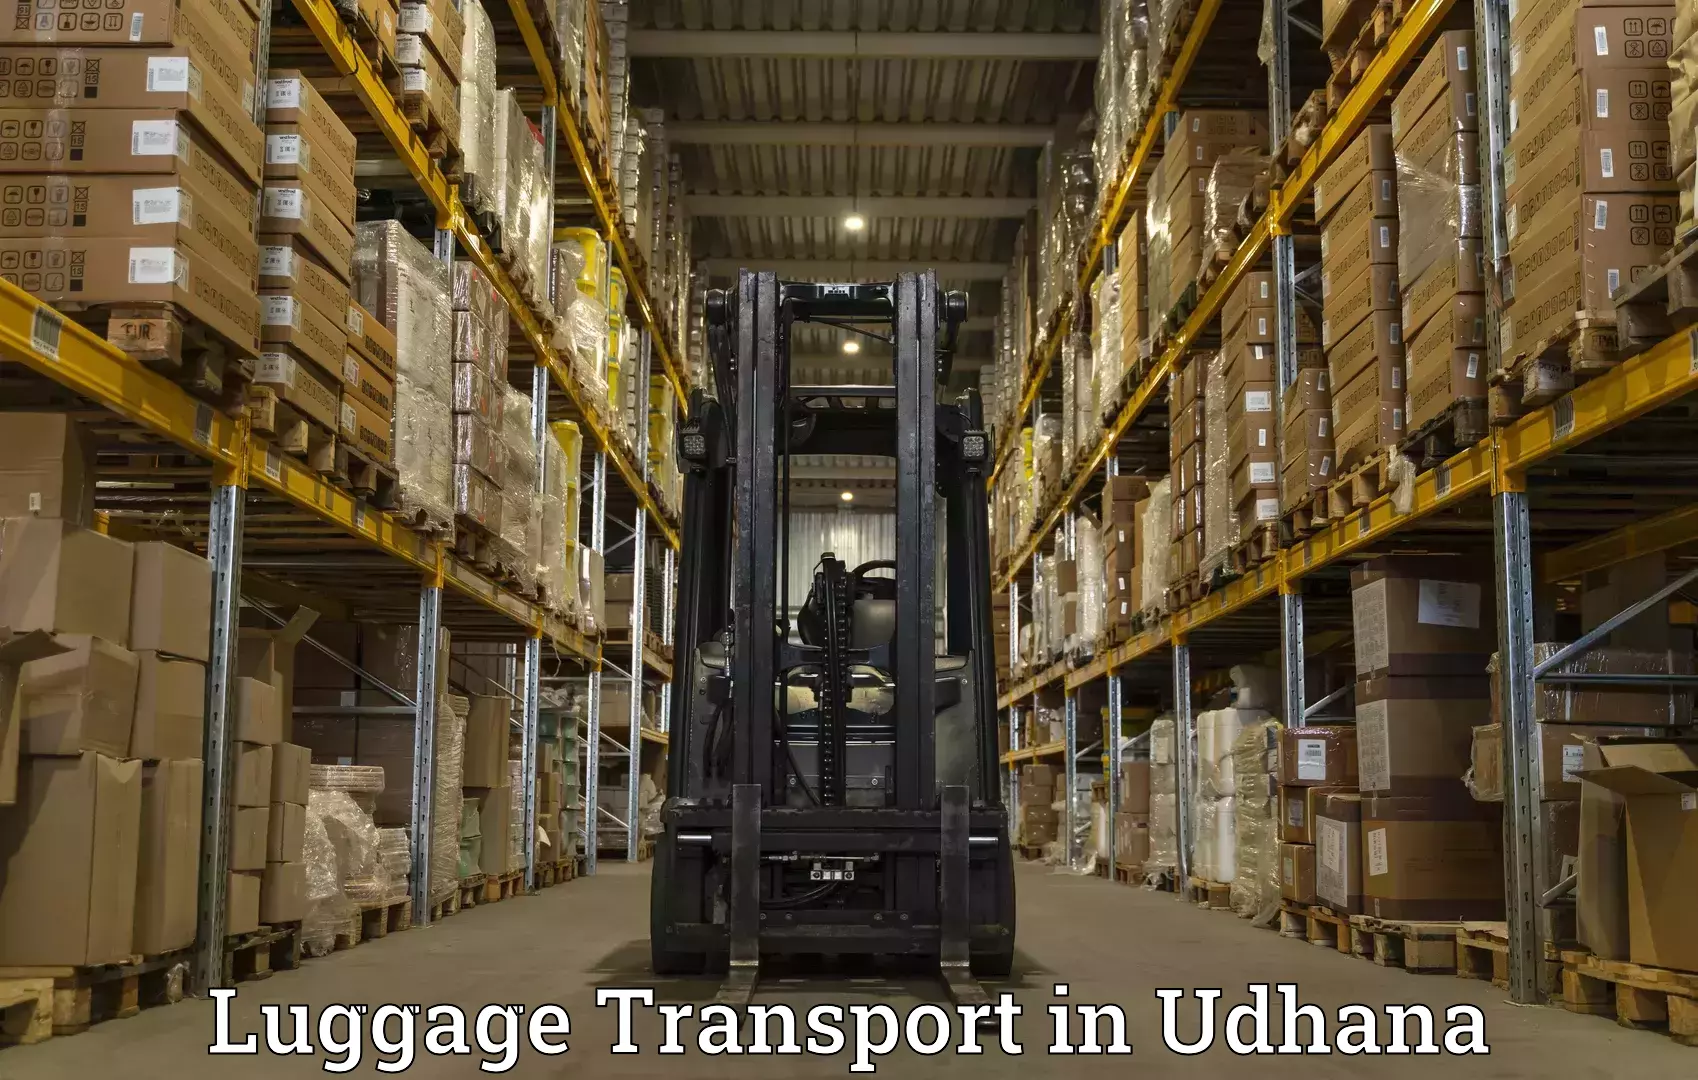 Luggage shipping planner in Udhana